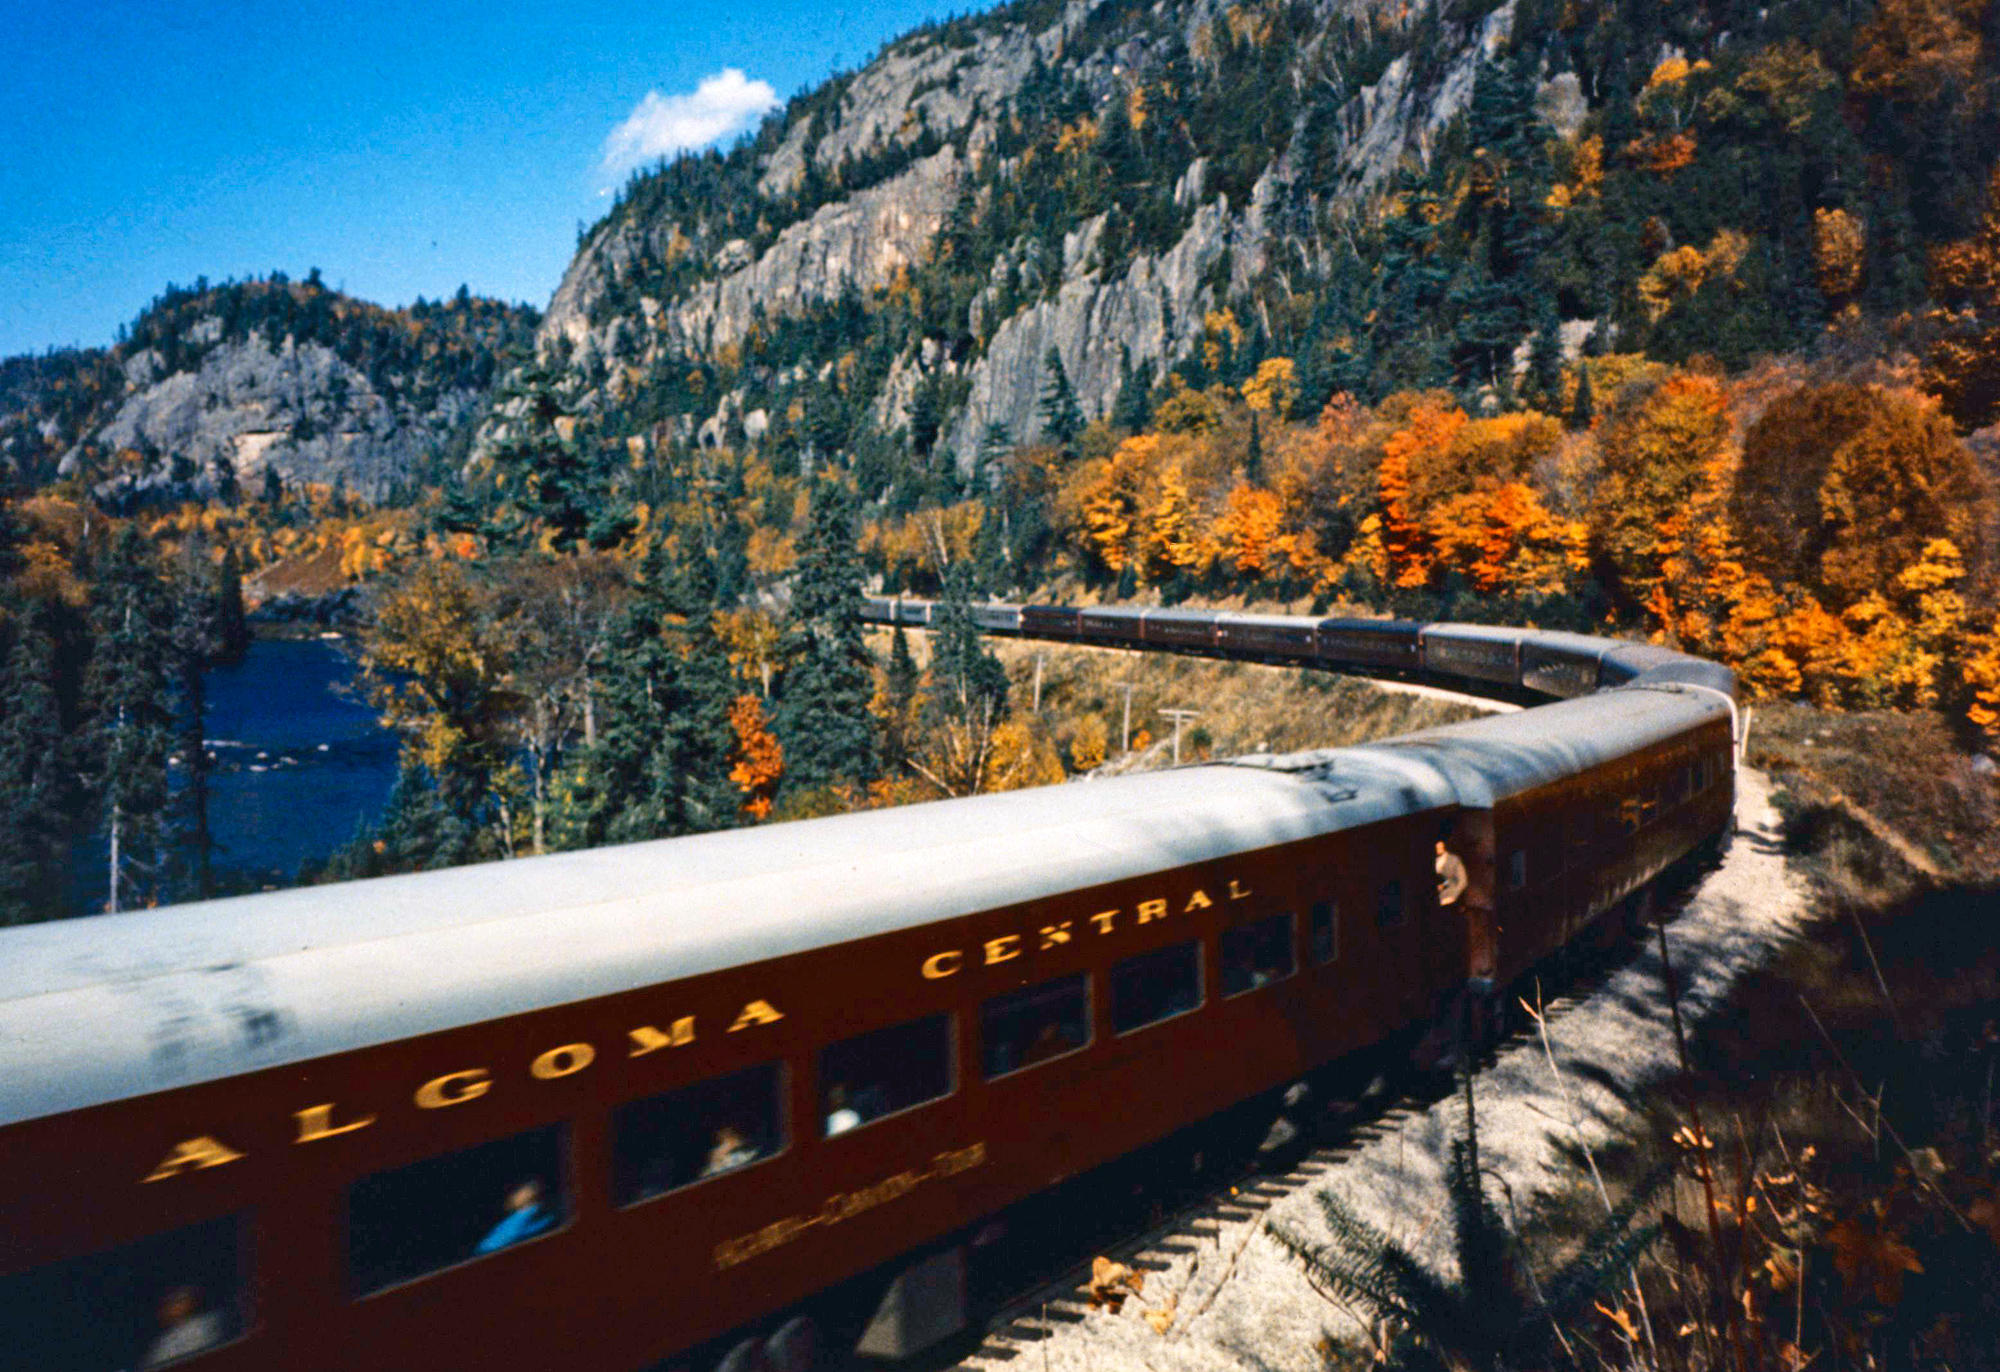 Old Train Car in the Colorado Mountains Fall Colors